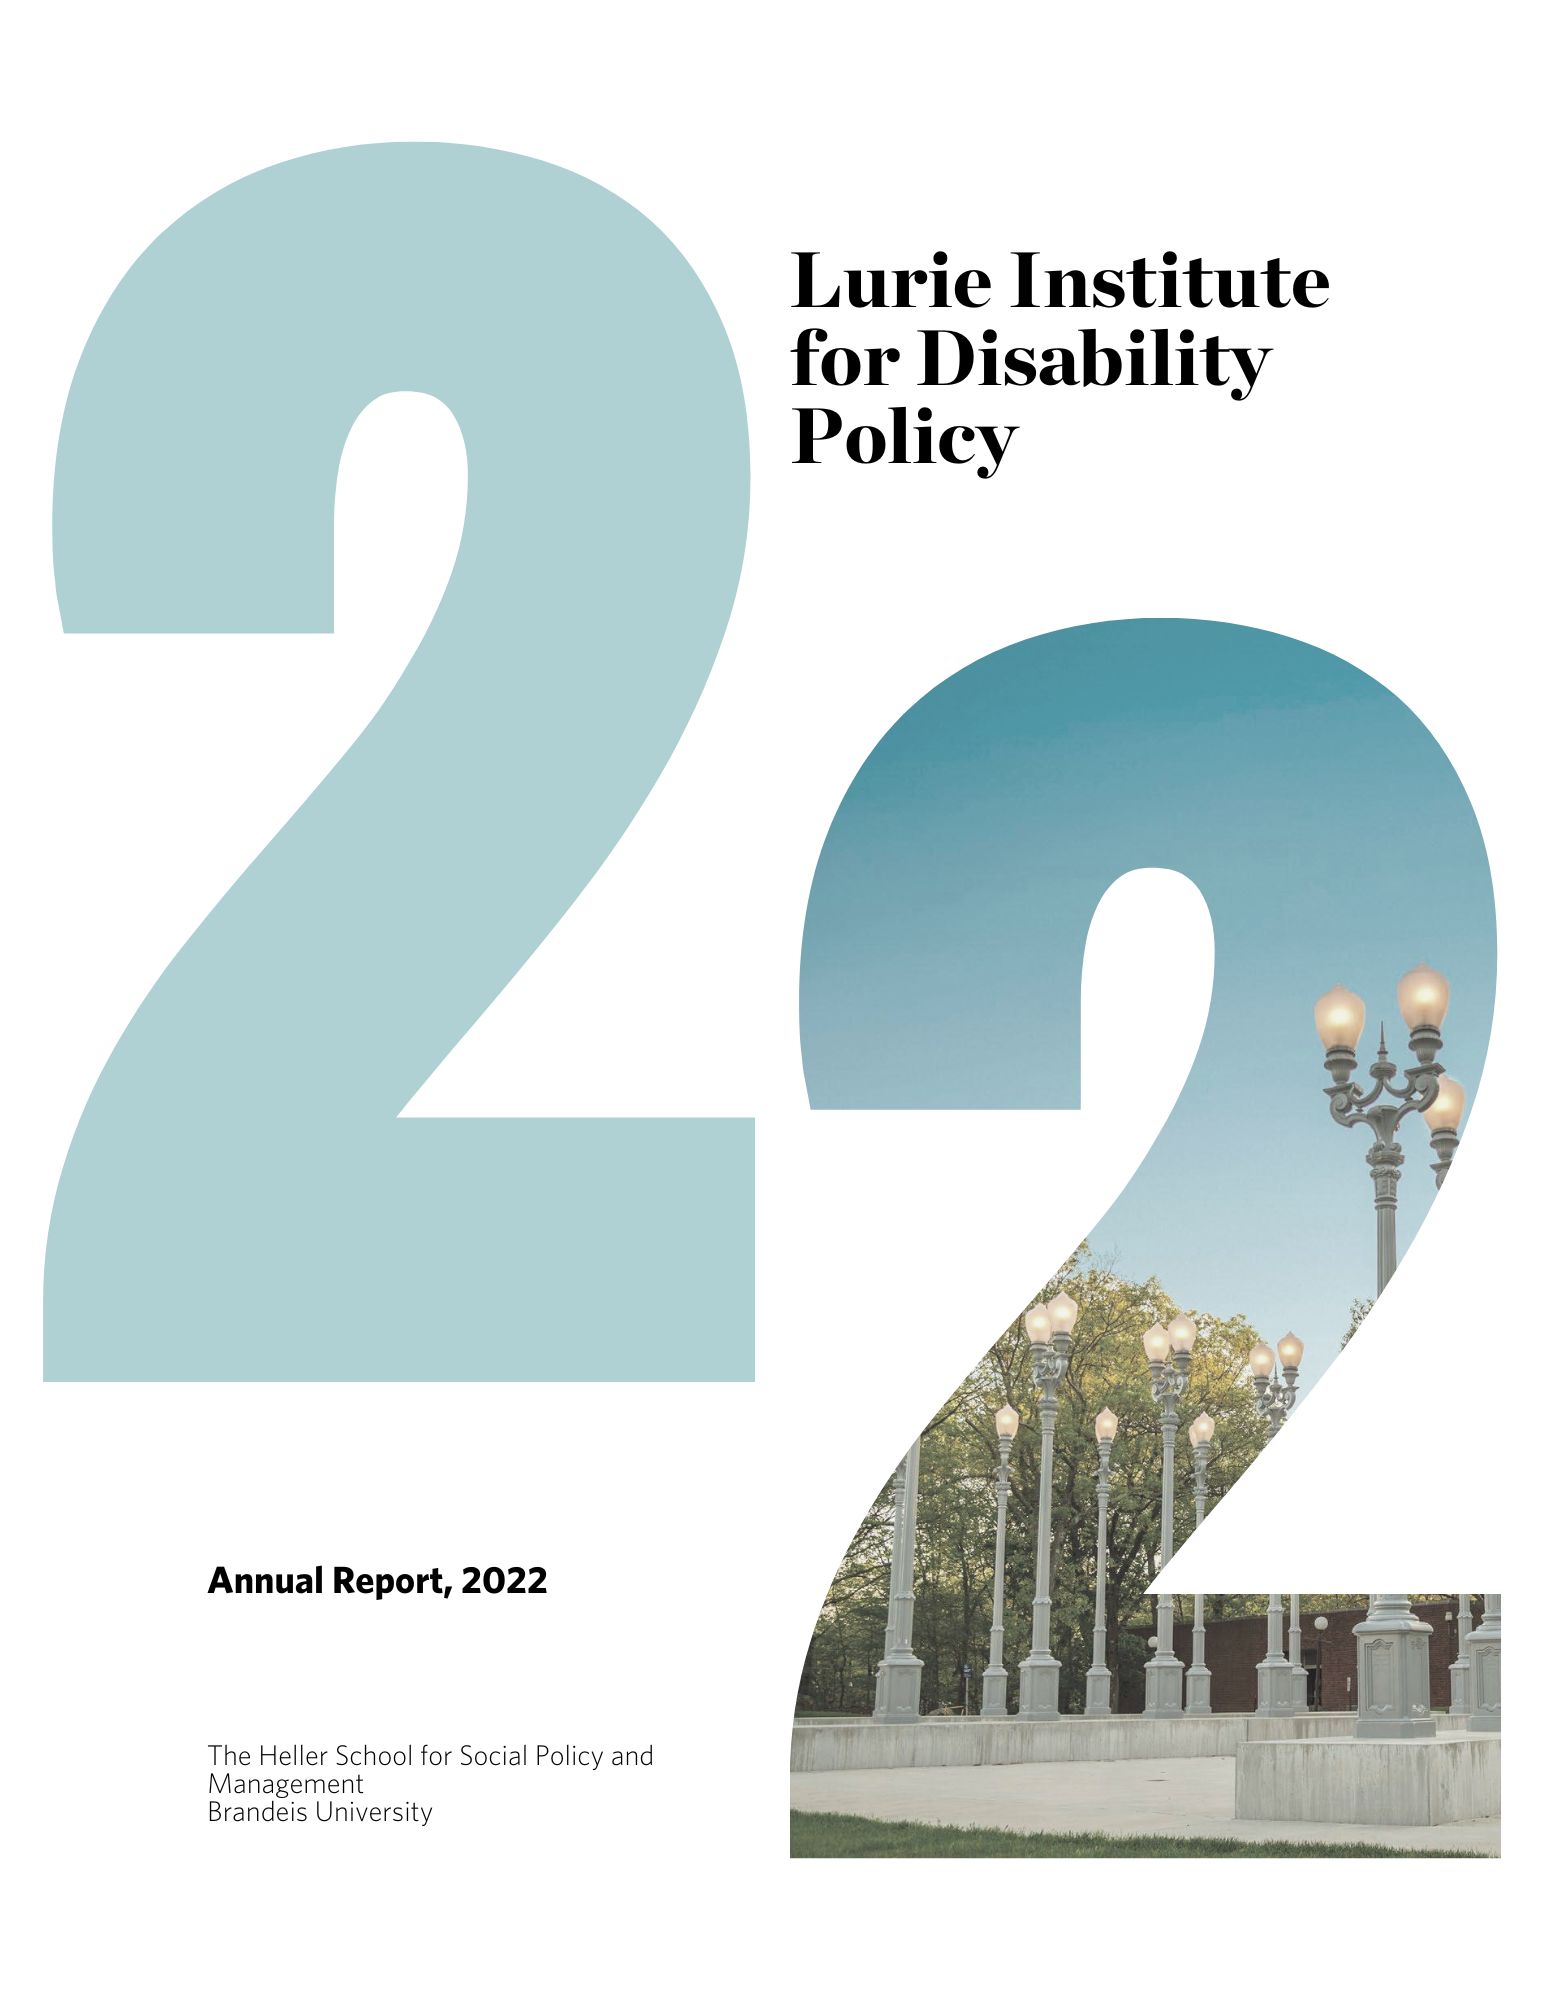 Lurie Institute for Disability Policy, Annual Report 2022. The Heller School for Social Policy and Management Brandeis University. The numbers 22 are prominent on the page, with a photo of the famous lightpost art structure on Brandeis University cropped inside the numbers.  